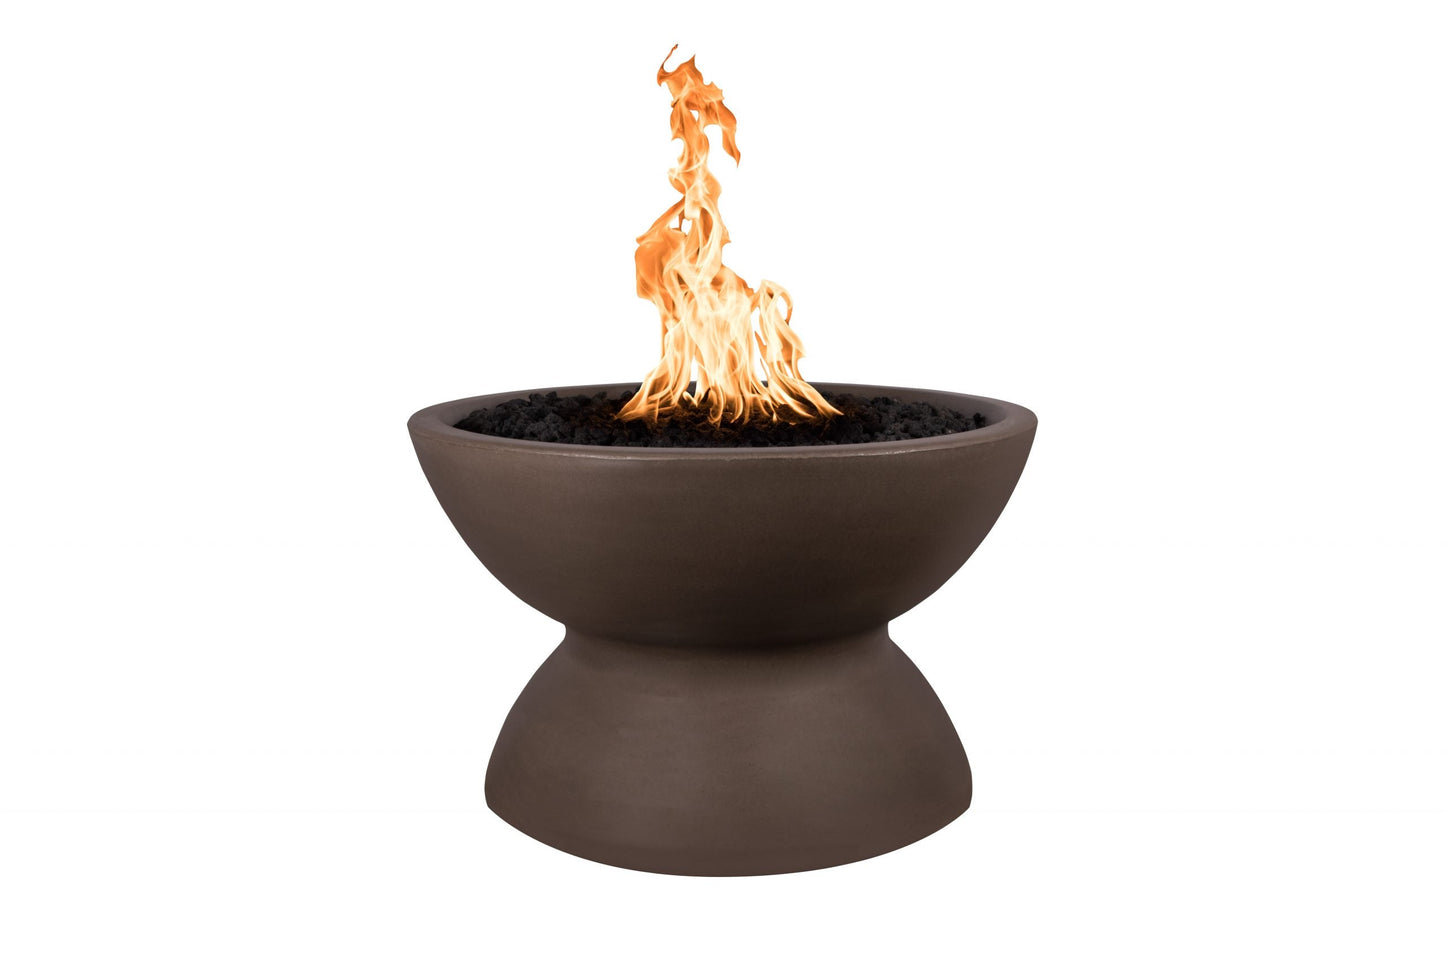 The Outdoor Plus Round Copa 33" Rustic White GFRC Concrete Liquid Propane Fire Pit with 12V Electronic Ignition